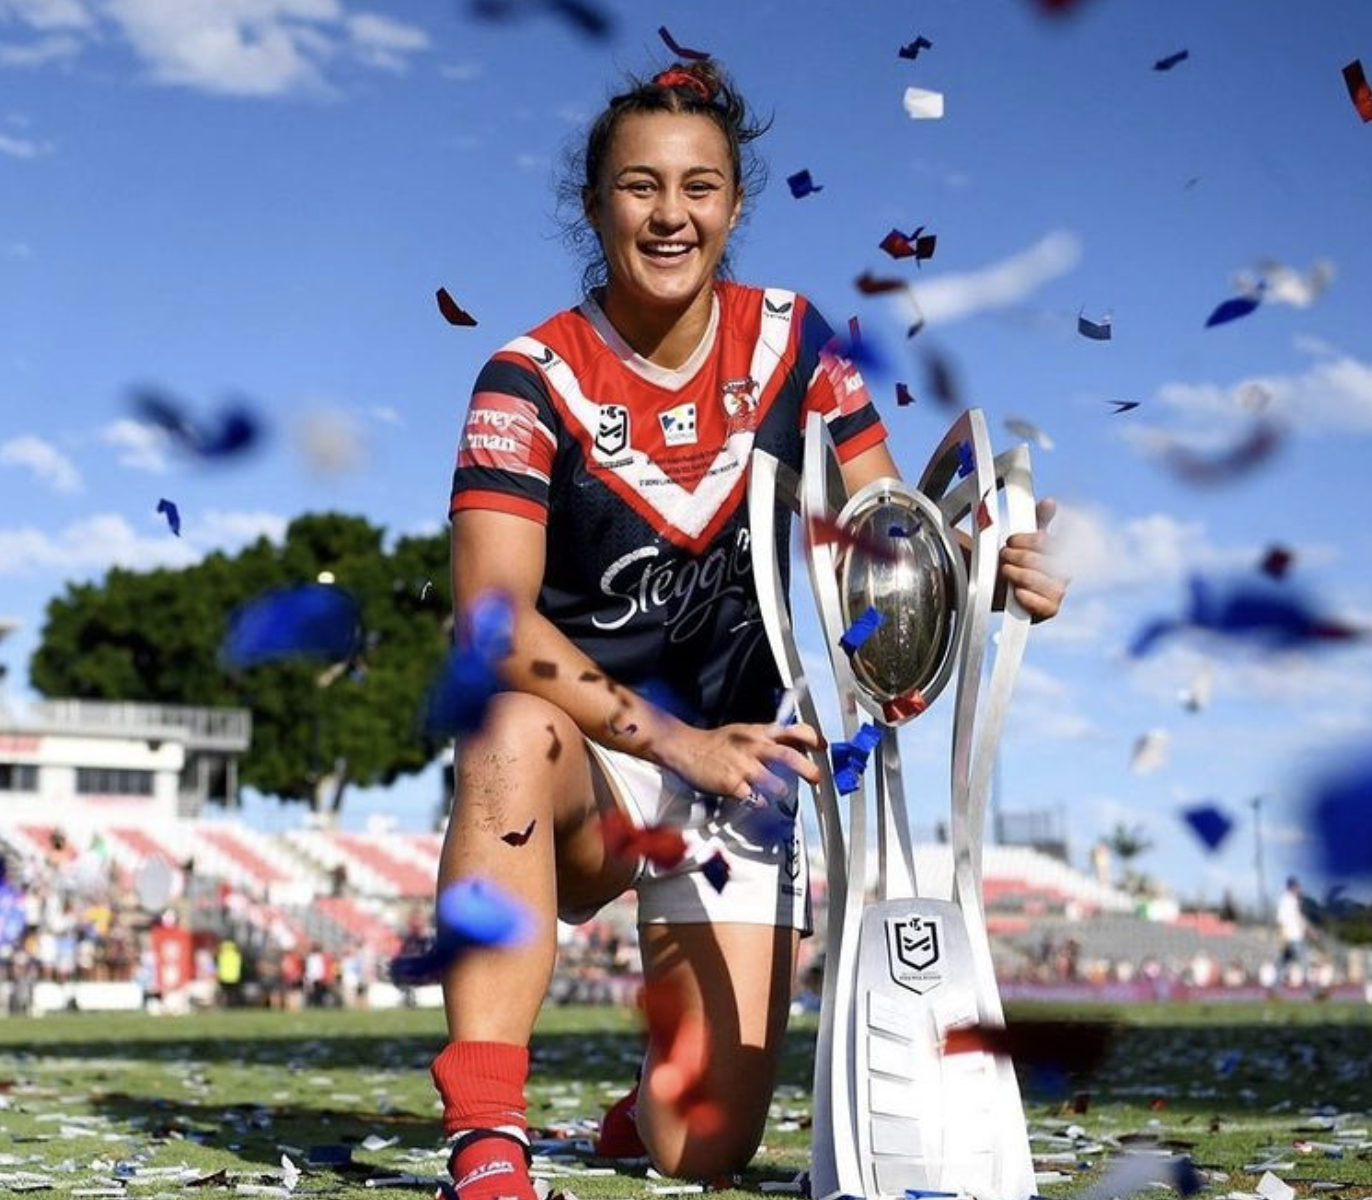 Corban Baxter with the NRLW Trophy after the Grand Final in Redcliffe